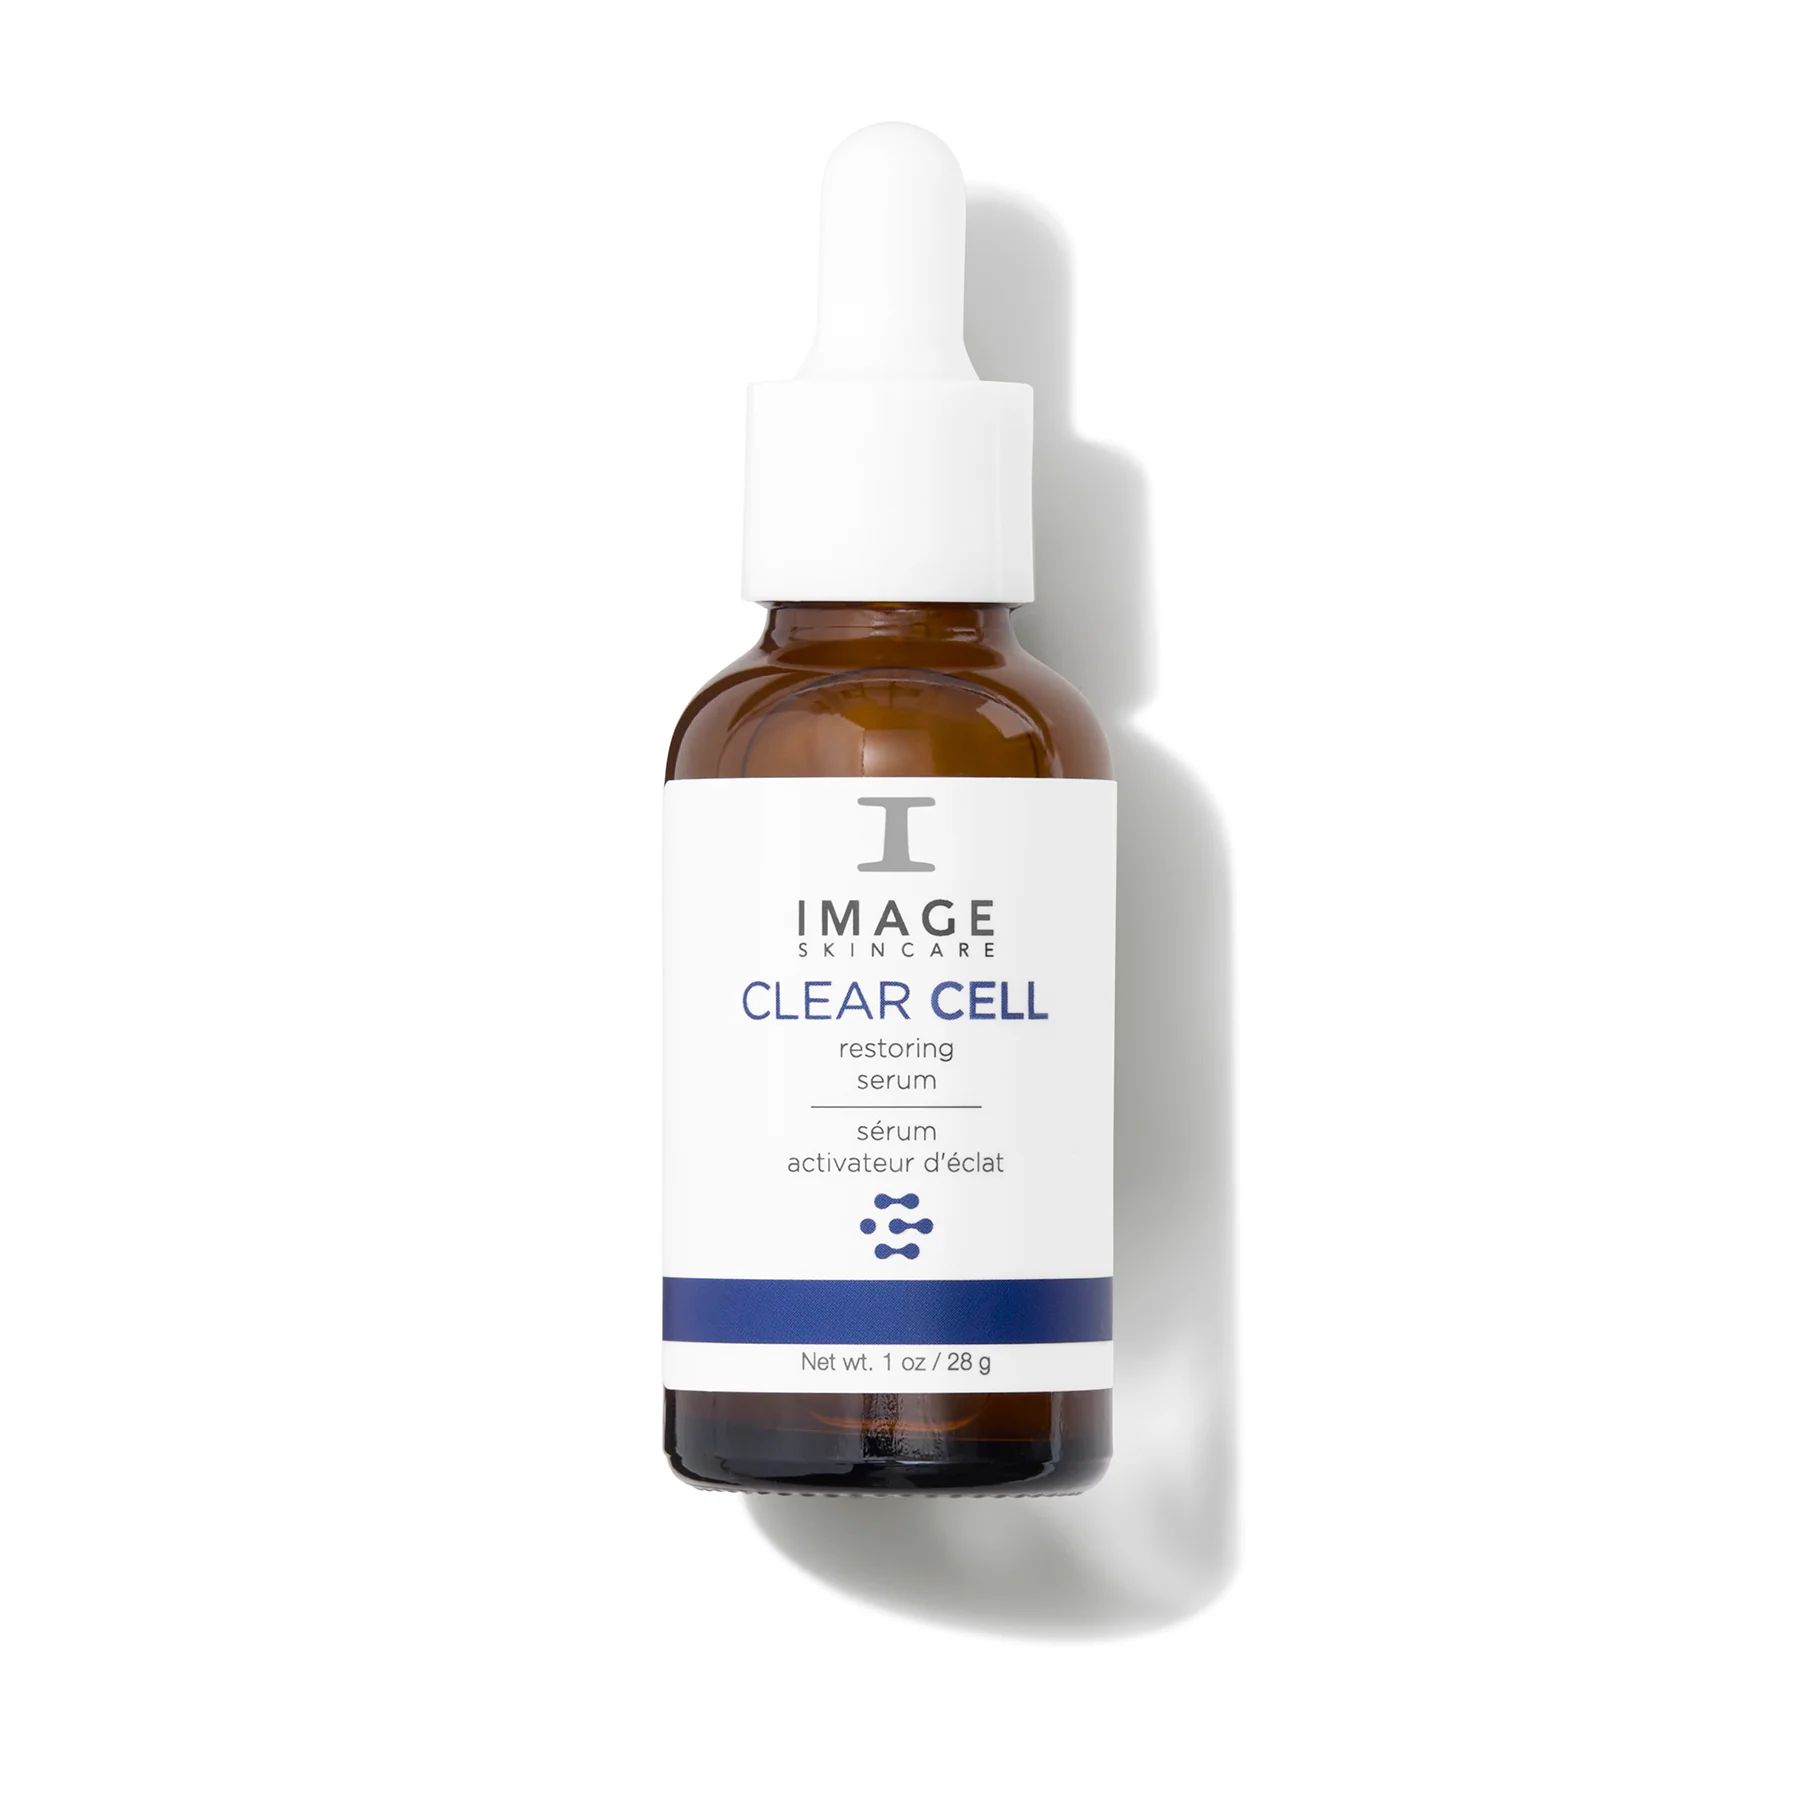 CLEAR CELL Restoring Serum | Image Skincare